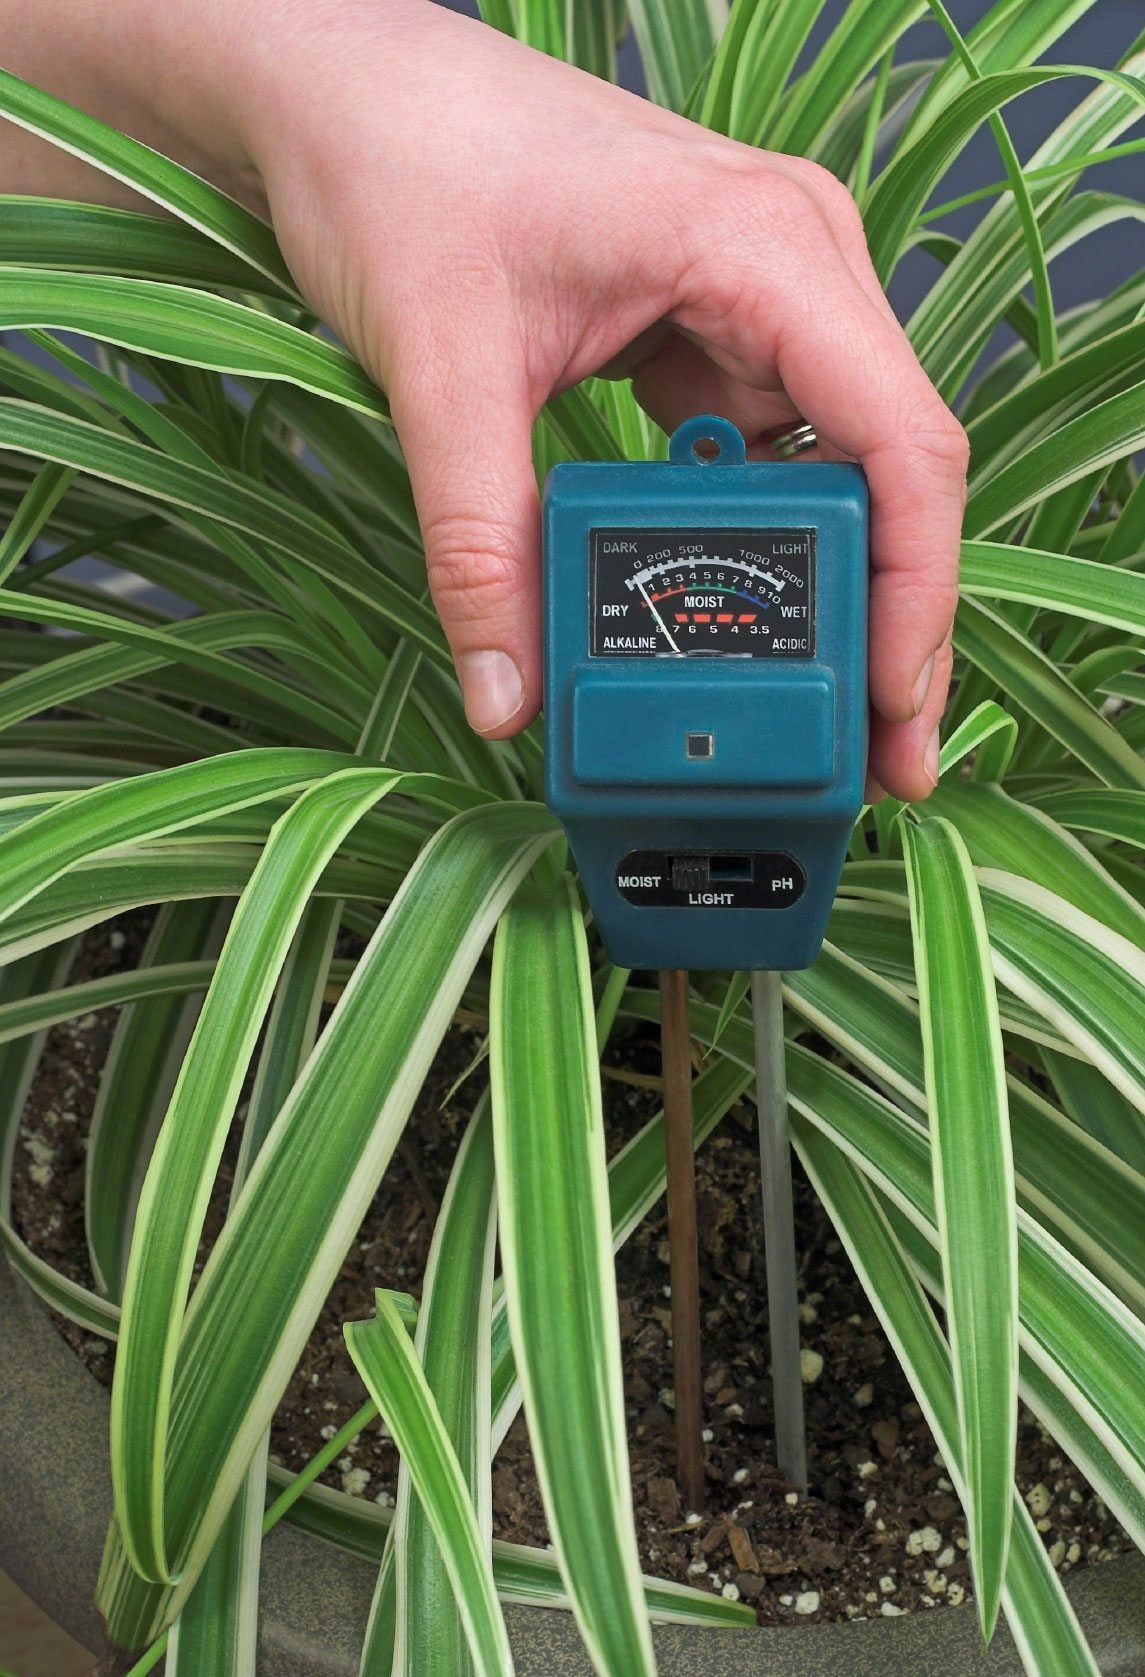 How to Use a Soil Moisture Meter